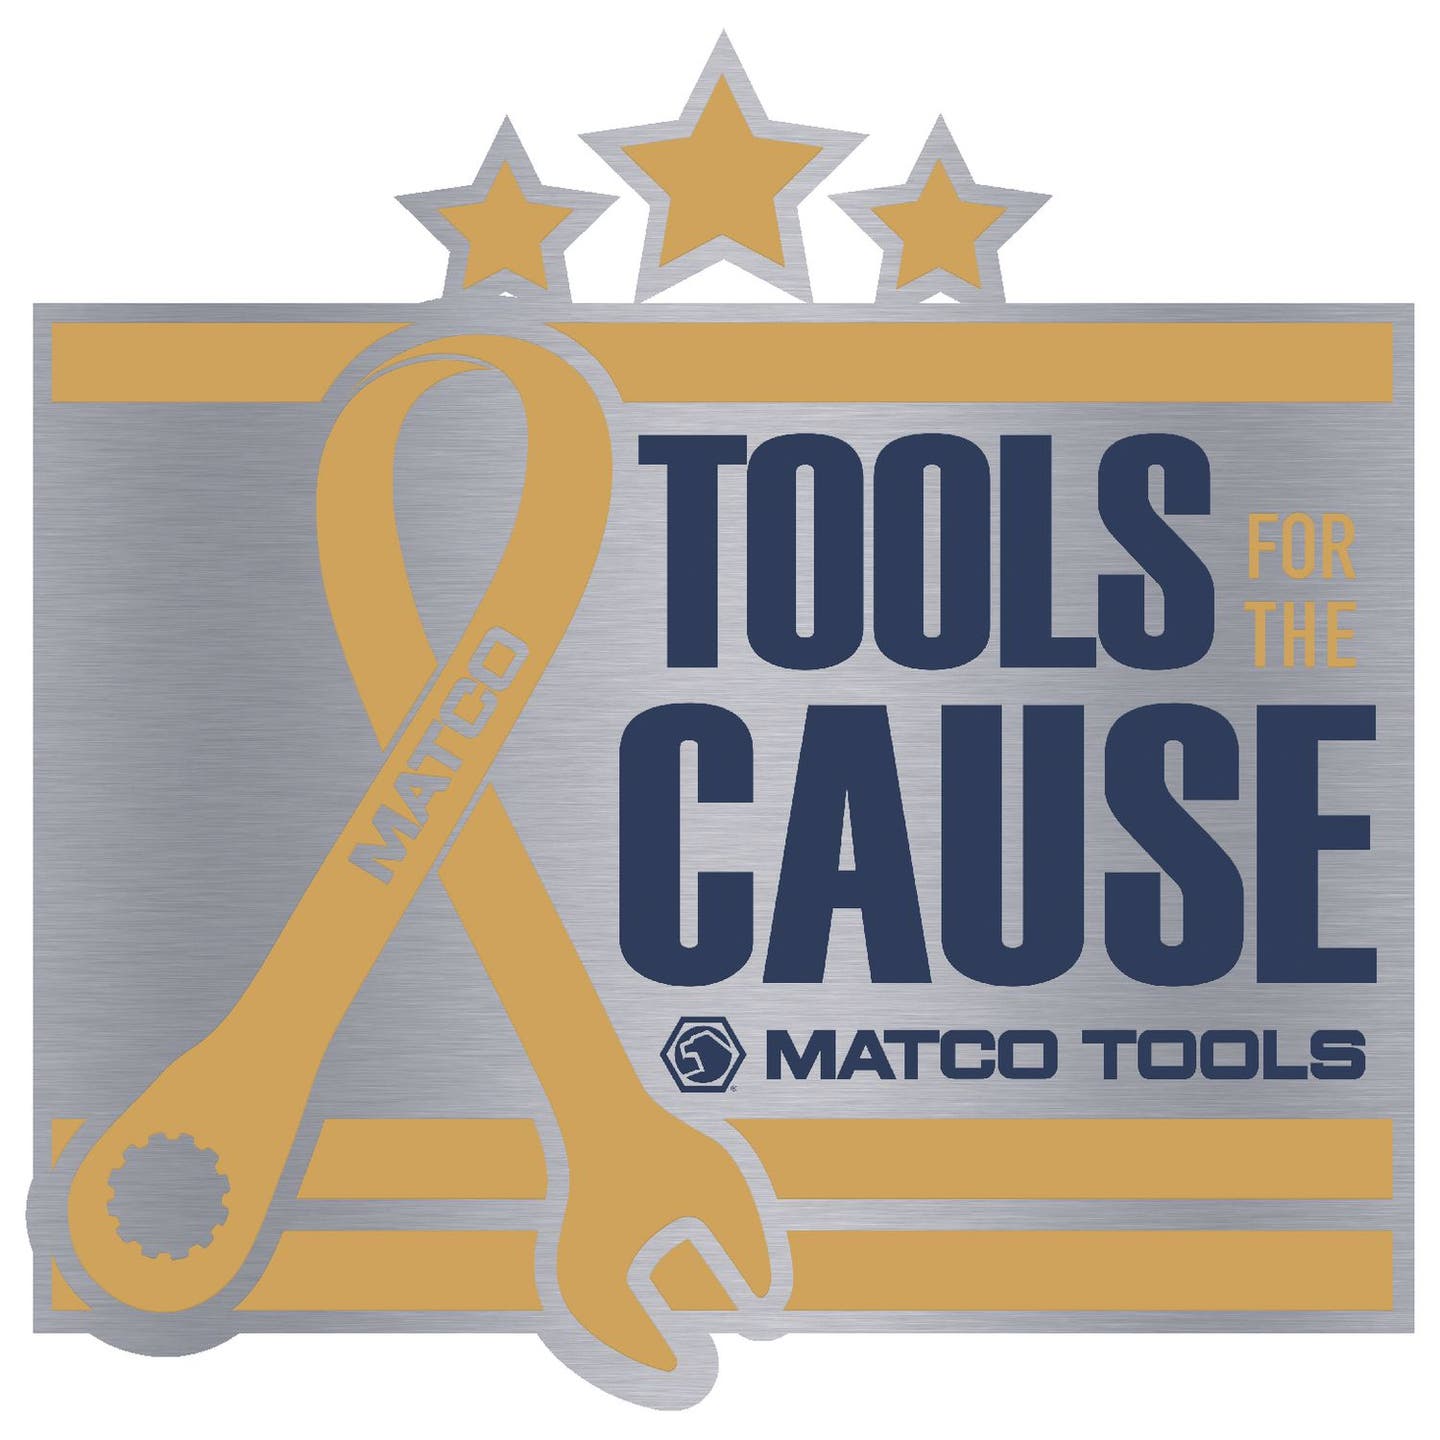 FISHER HOUSE TOOLS FOR THE CAUSE METAL ART